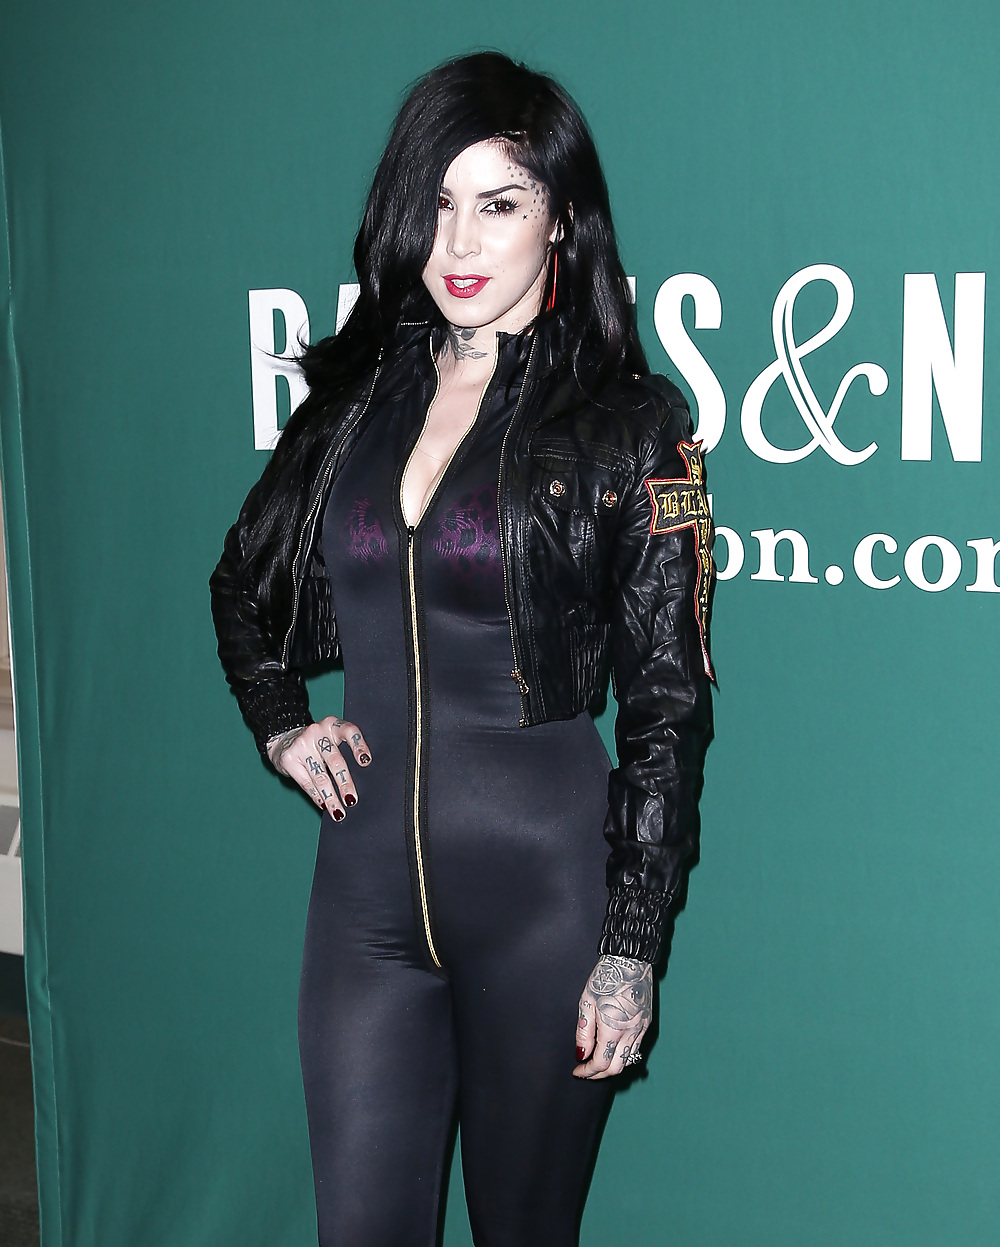 Kat Von D - Drachenberg in sexy Catsuit with Ass and Heels #19829683